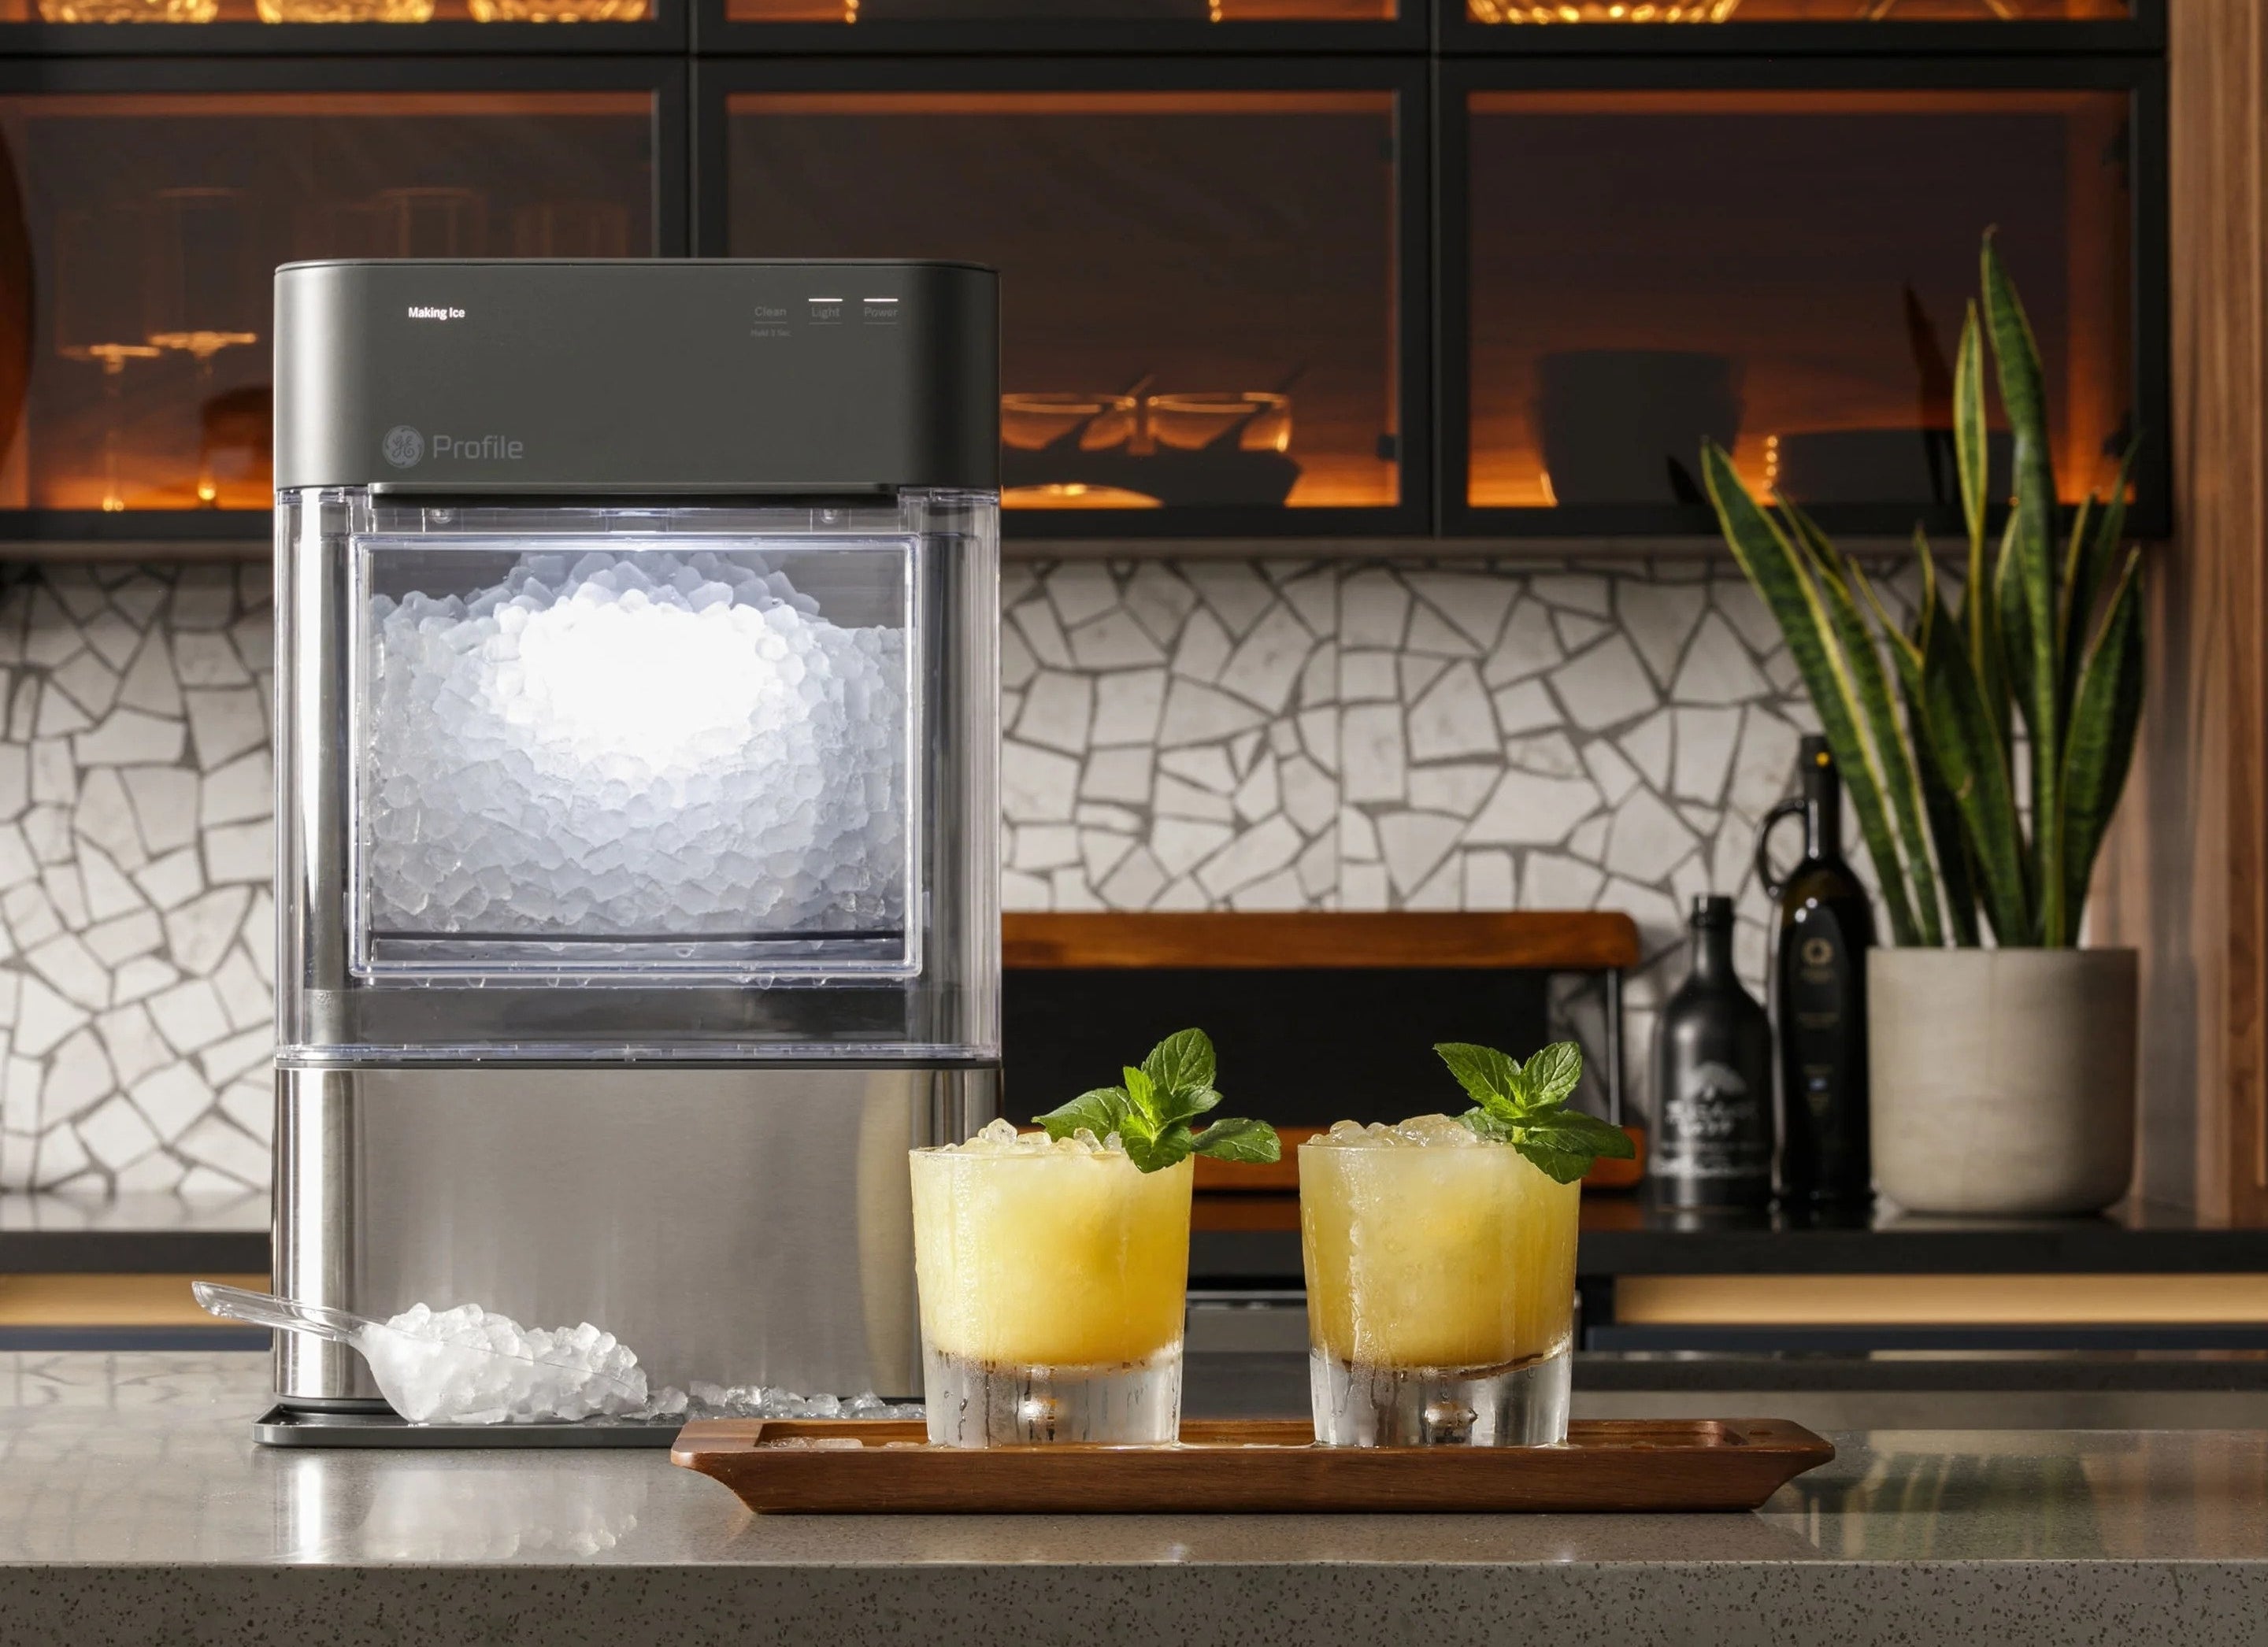 The ice maker with a transparent bin and black stainless steel finish